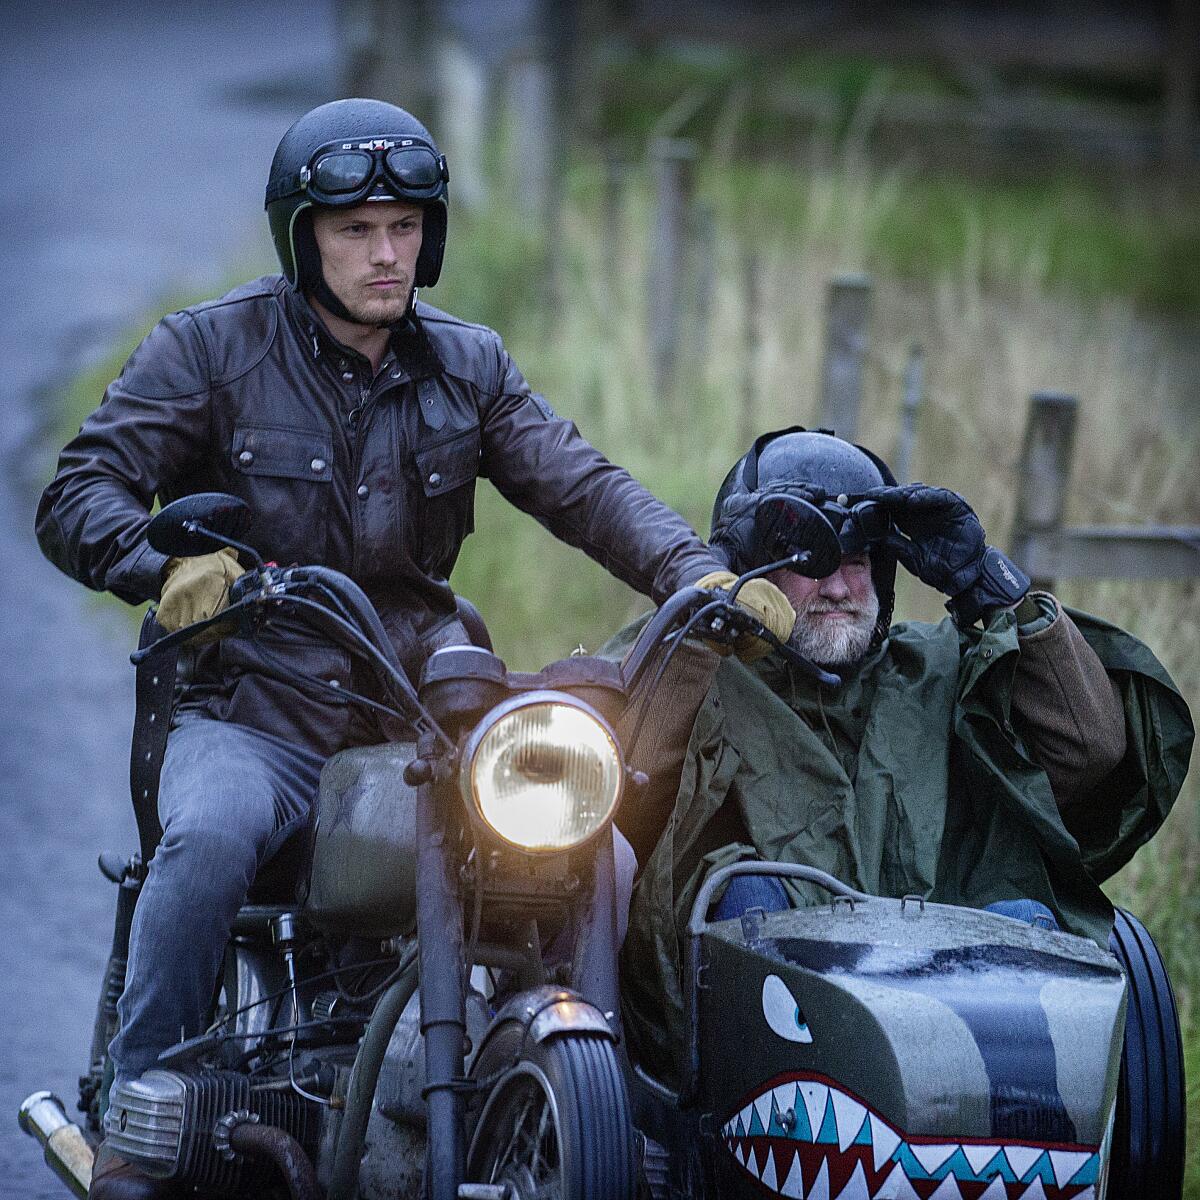 Sam Heughan on a motorbike and Graham McTavish in a sidecar.